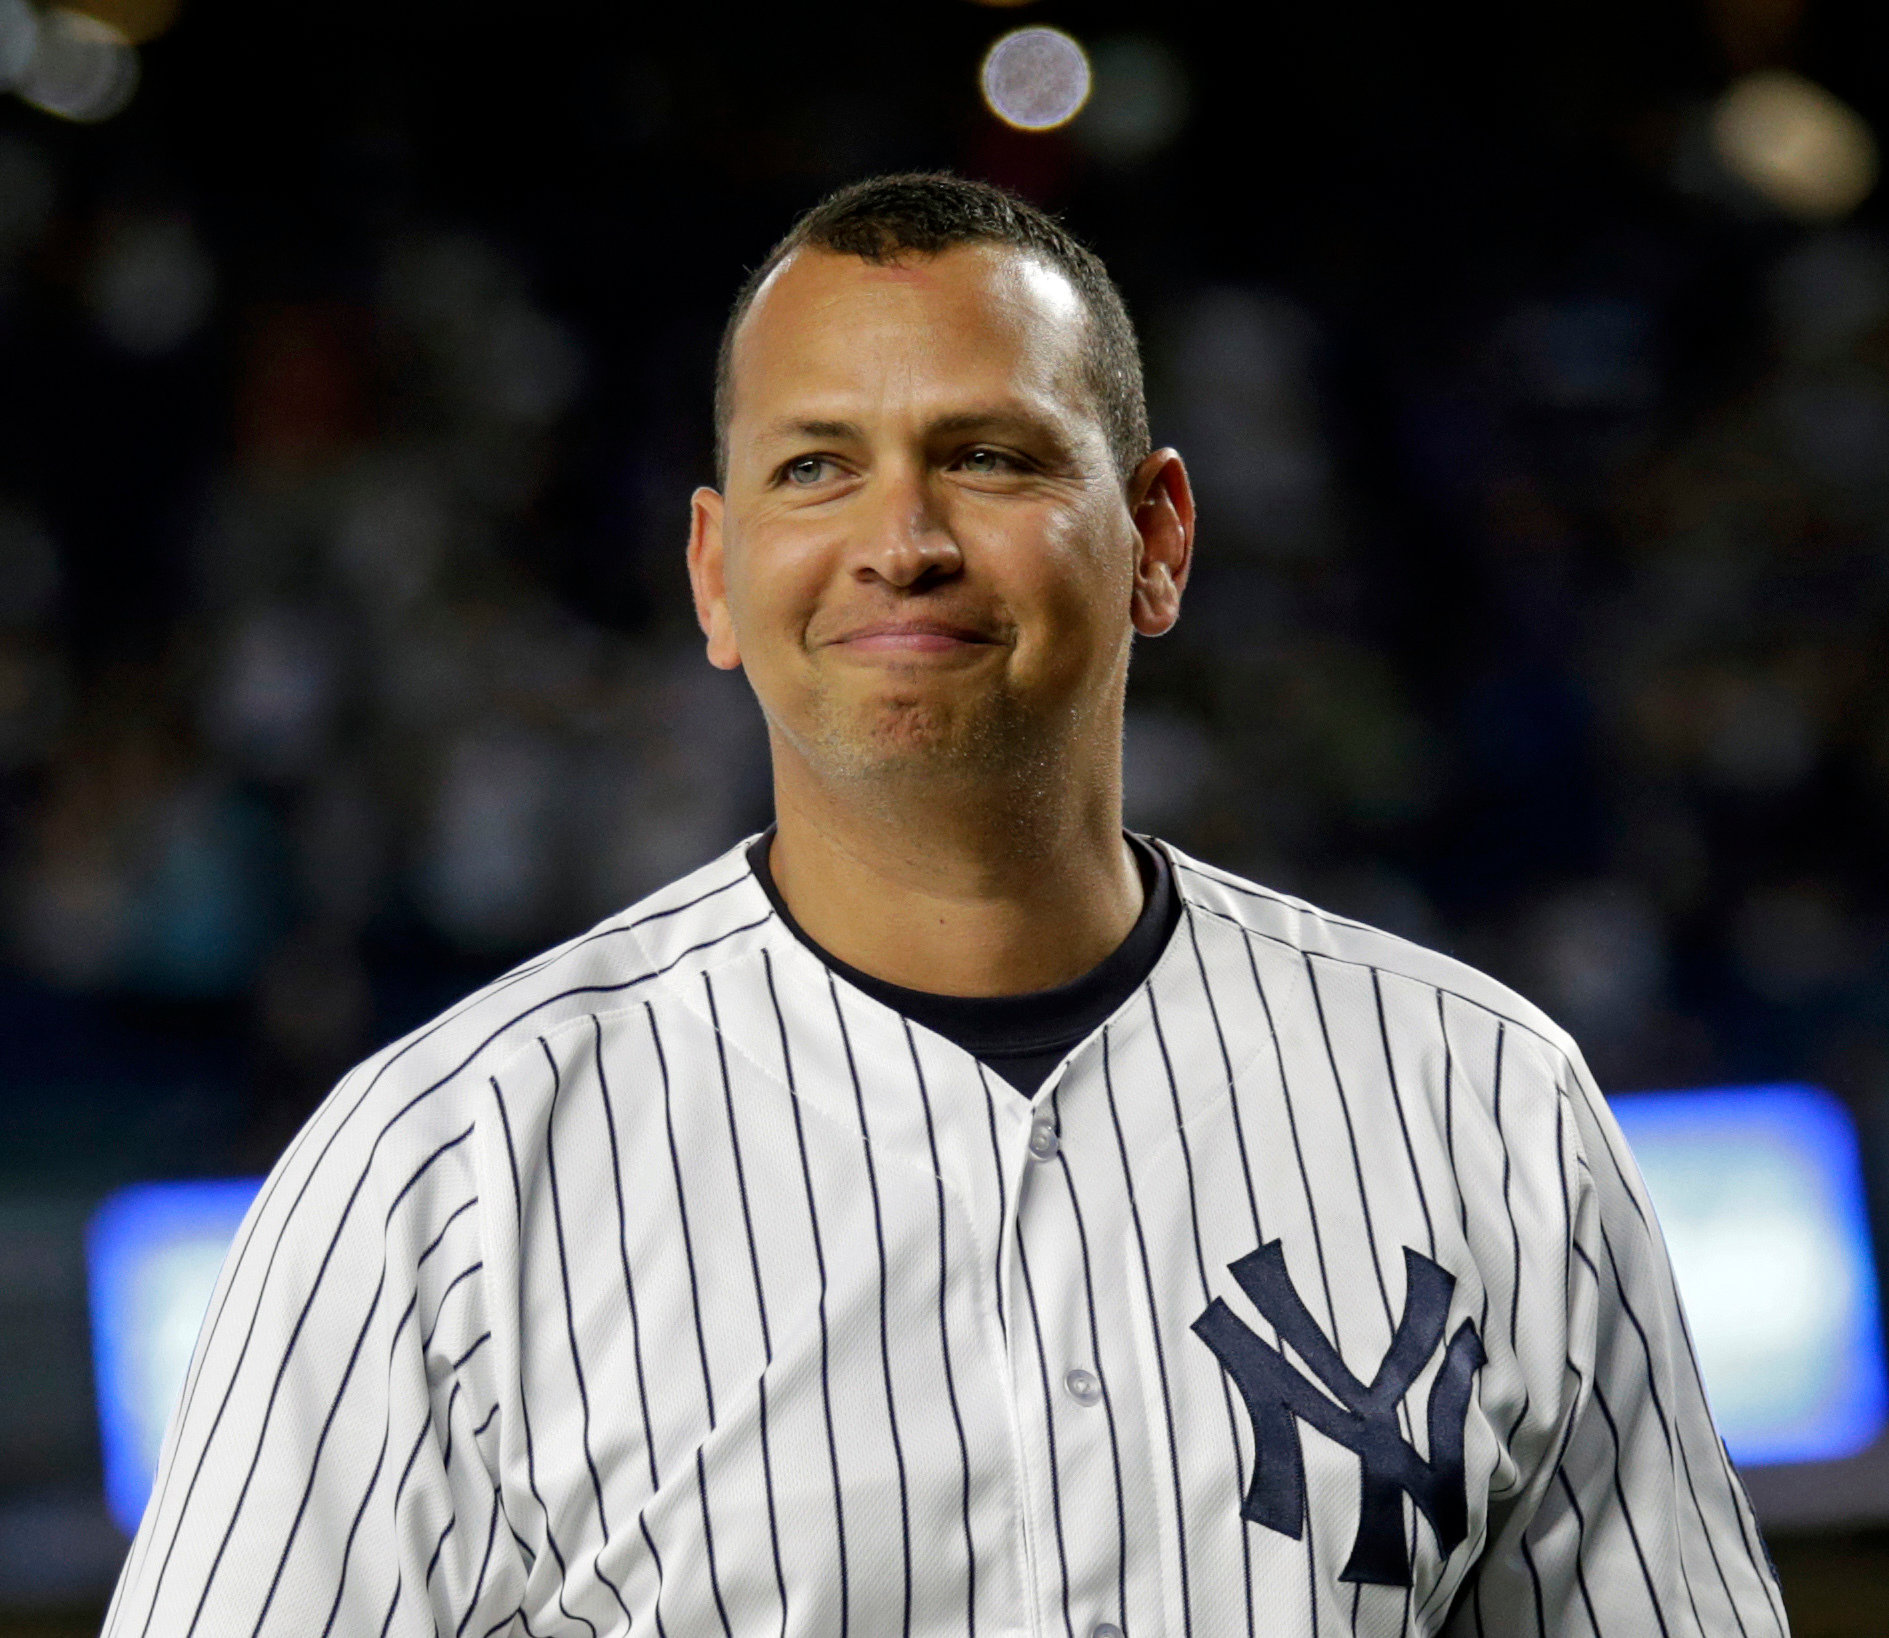 Alex Rodriguez Purchases the NBA’s Minnesota Timberwolves The